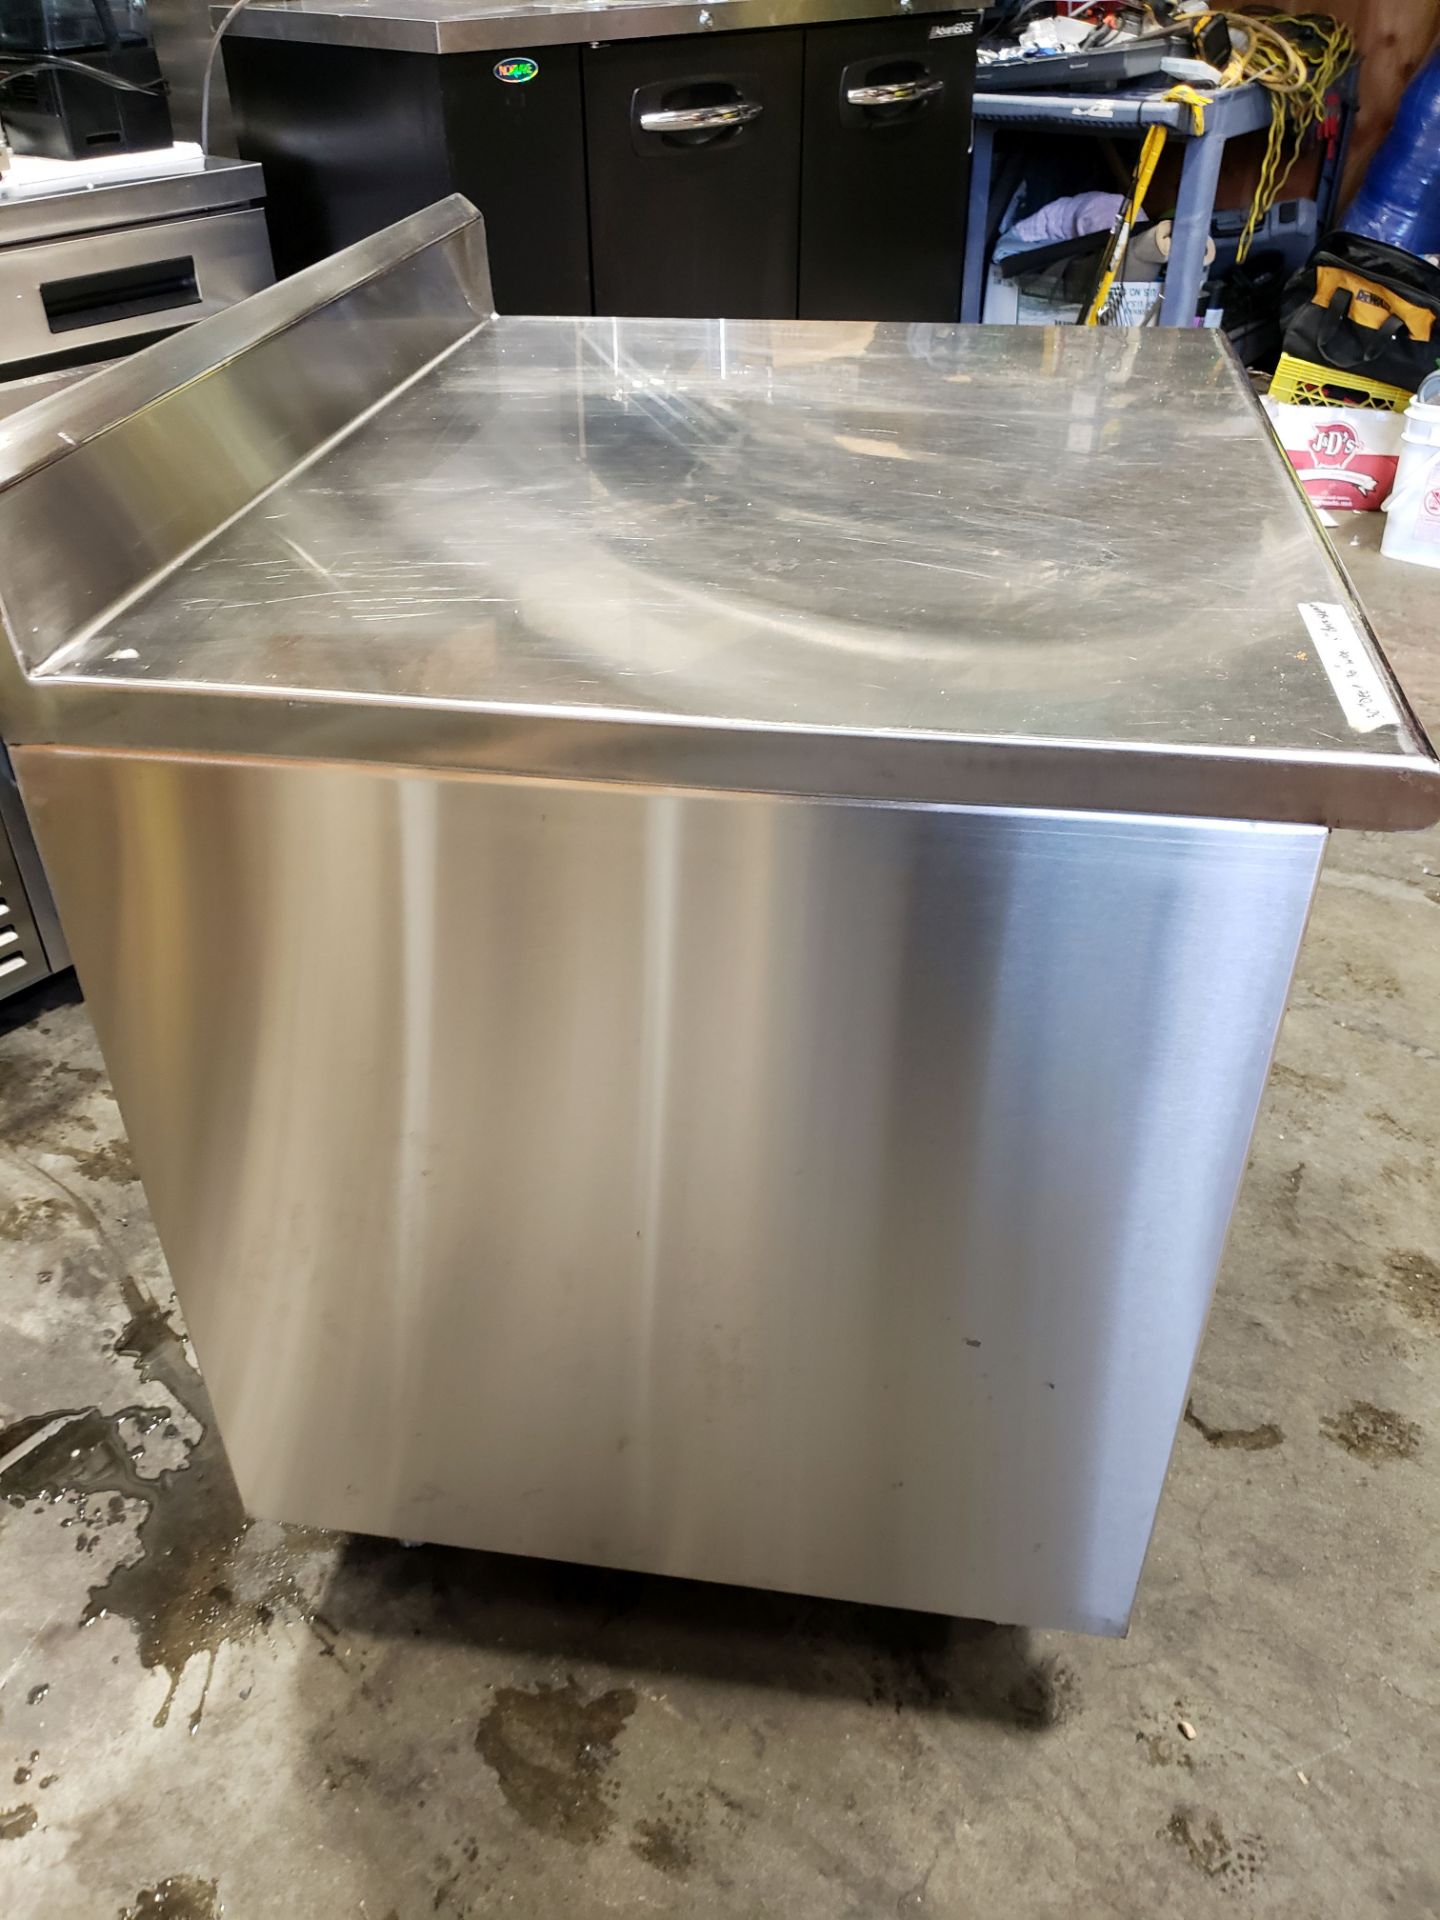 36" x 30" Stainless Cabinet with 5" Back Splash - Image 3 of 5